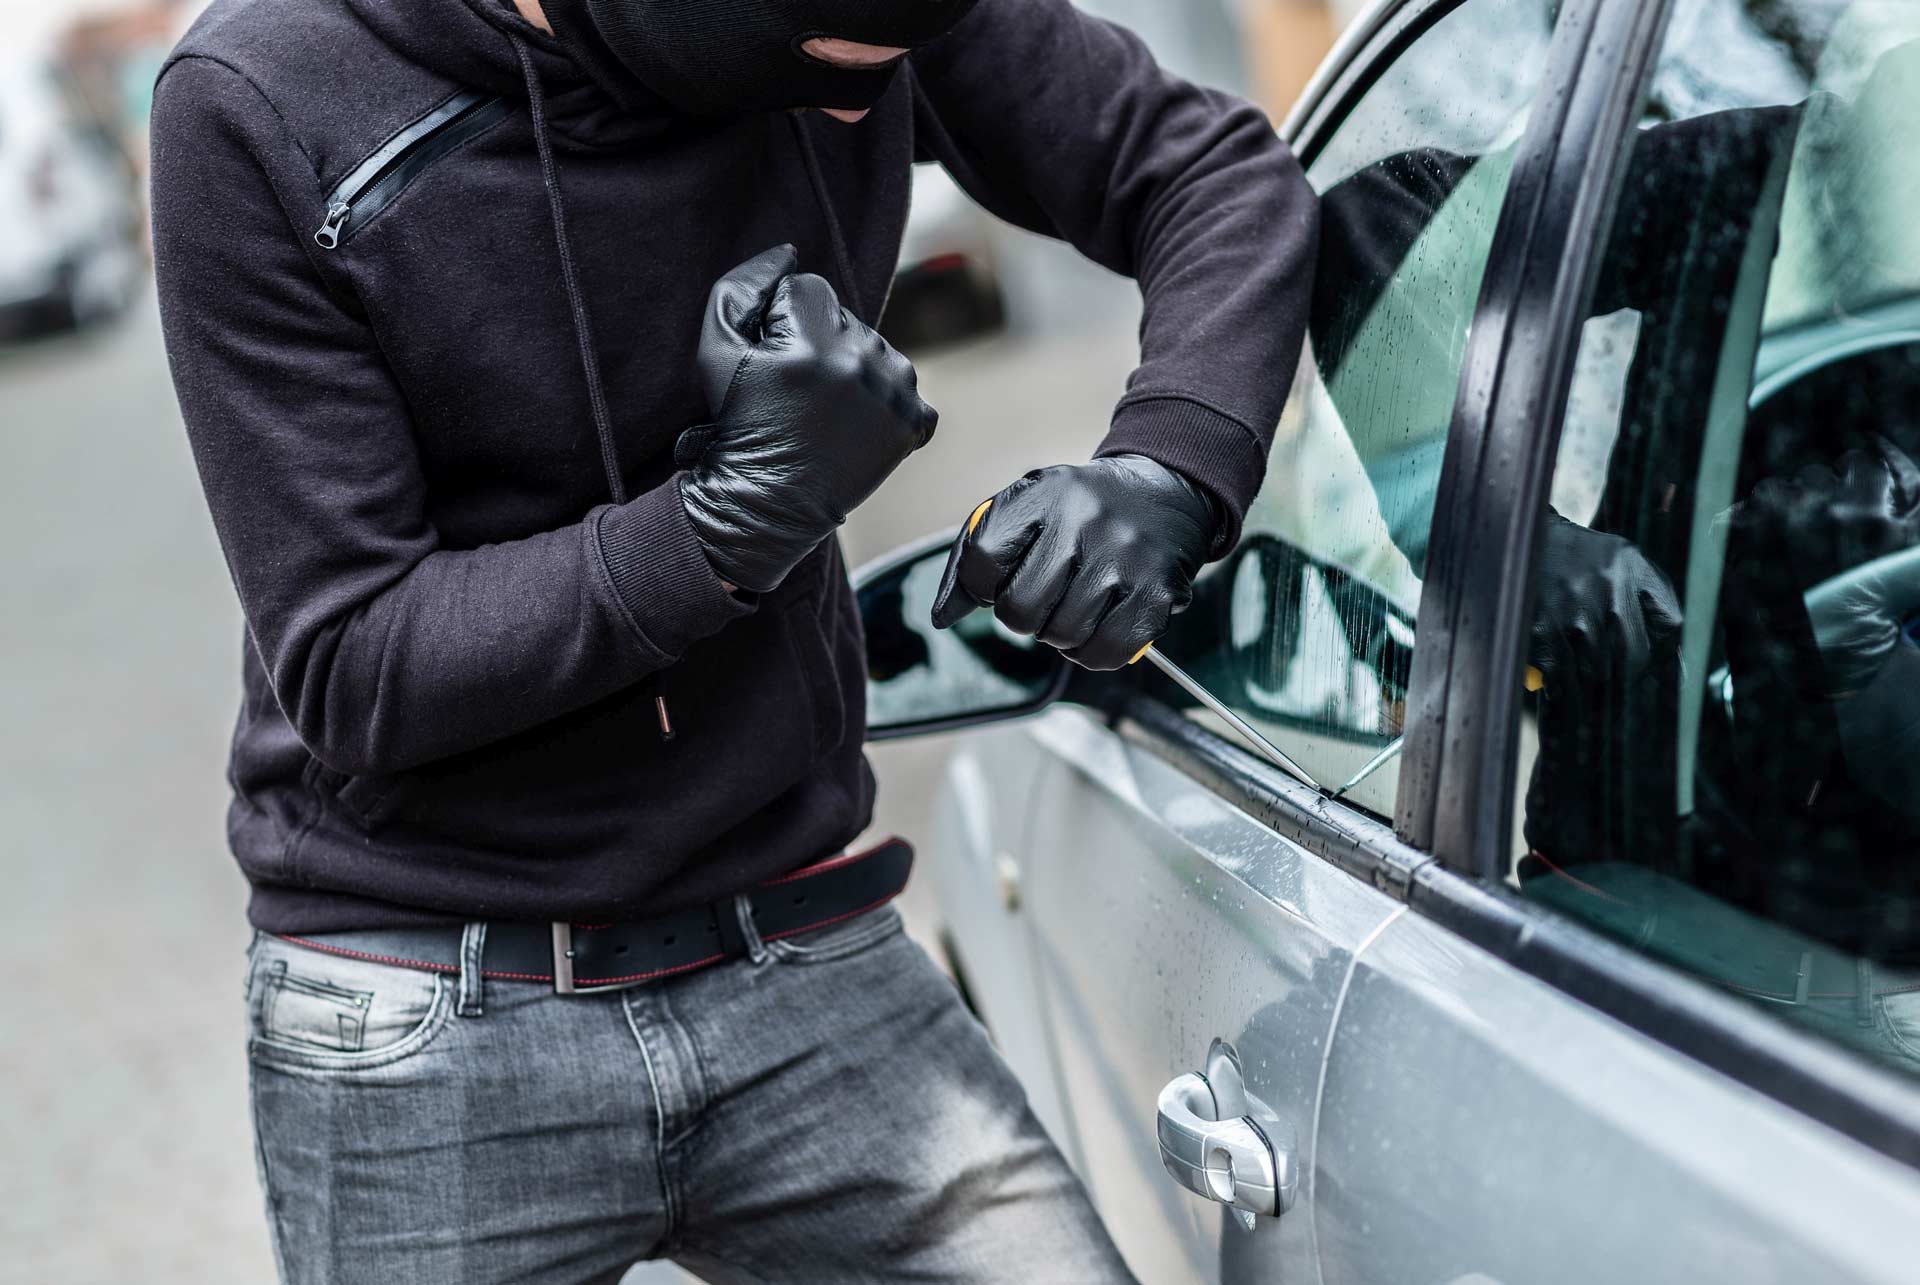 Thief breaking into a parked vehicle | Parkville Auto Body